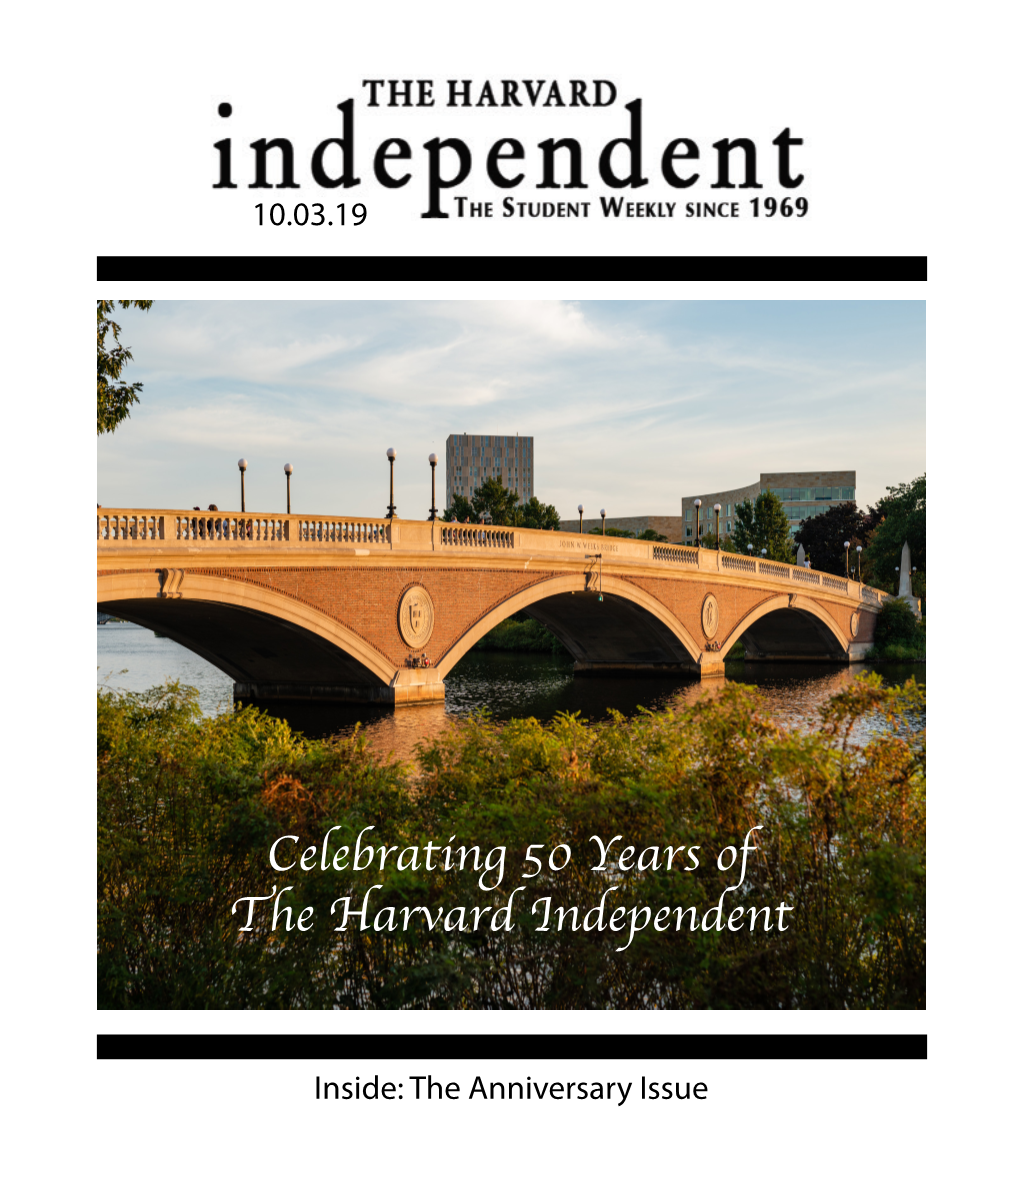 Celebrating 50 Years of the Harvard Independent